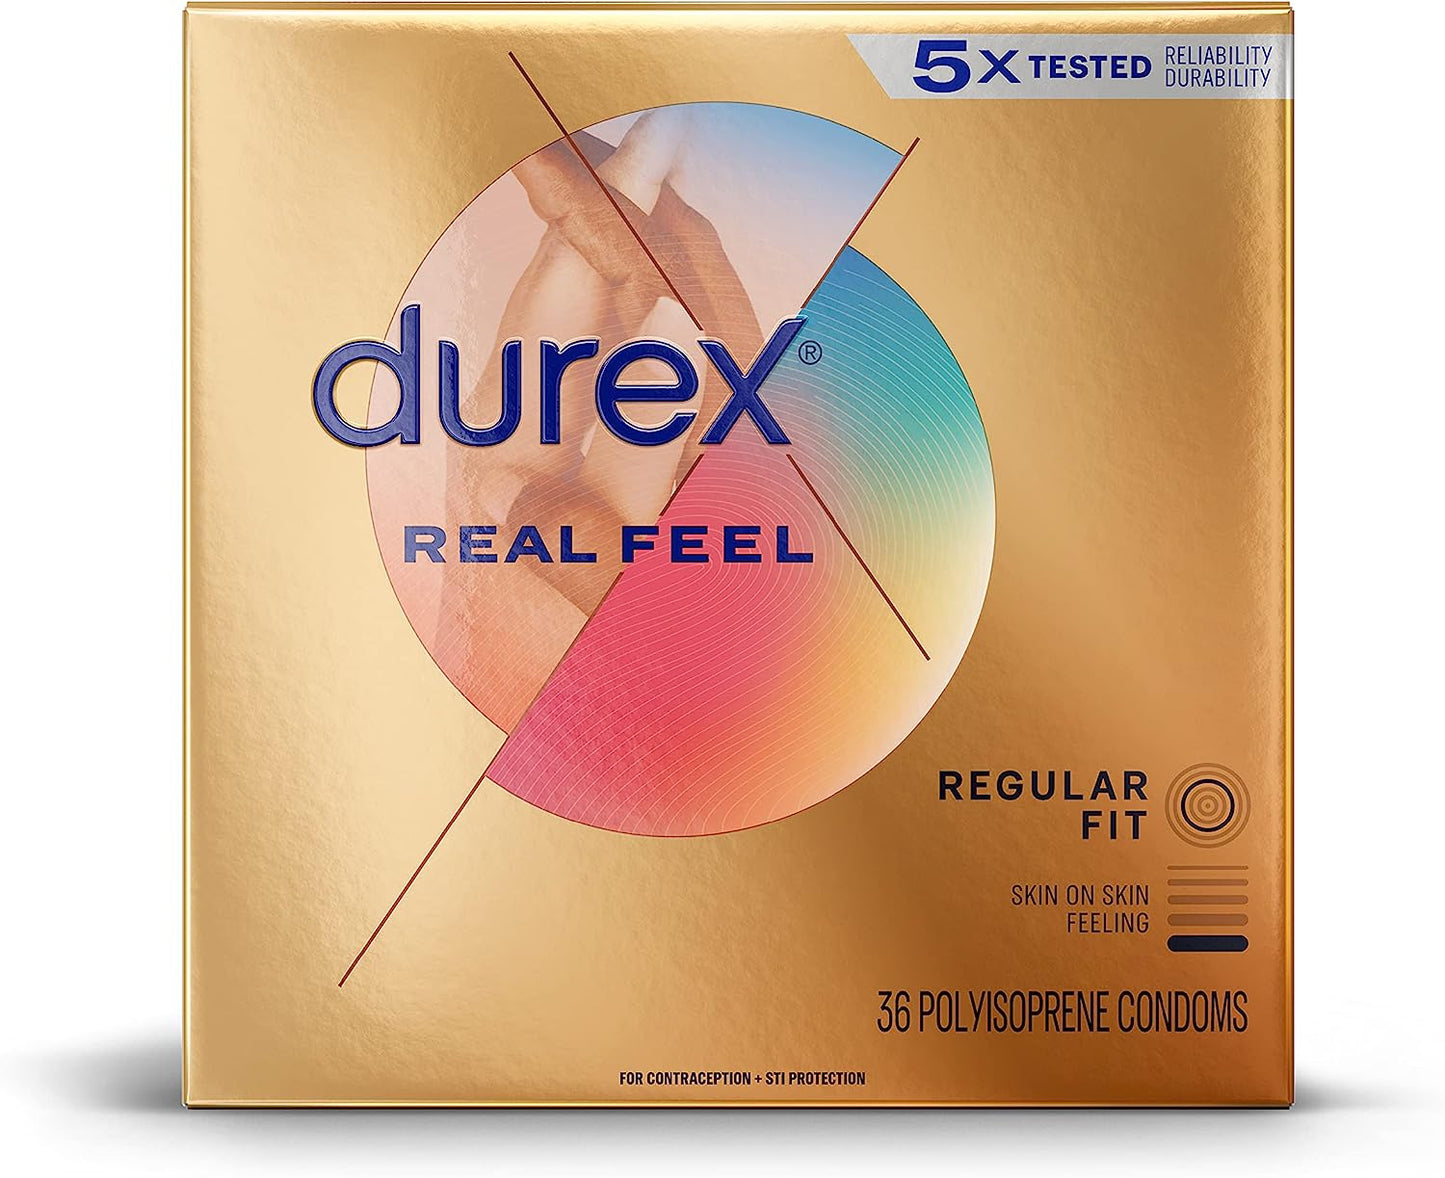 Durex - Condoms for Sex, Non Latex Durex Avanti Bare Real Feel Lubricated, Regular Fit for Men with Natural on Skin Feeling, FSA and HSA Eligible (Packaging may Vary),36 Count